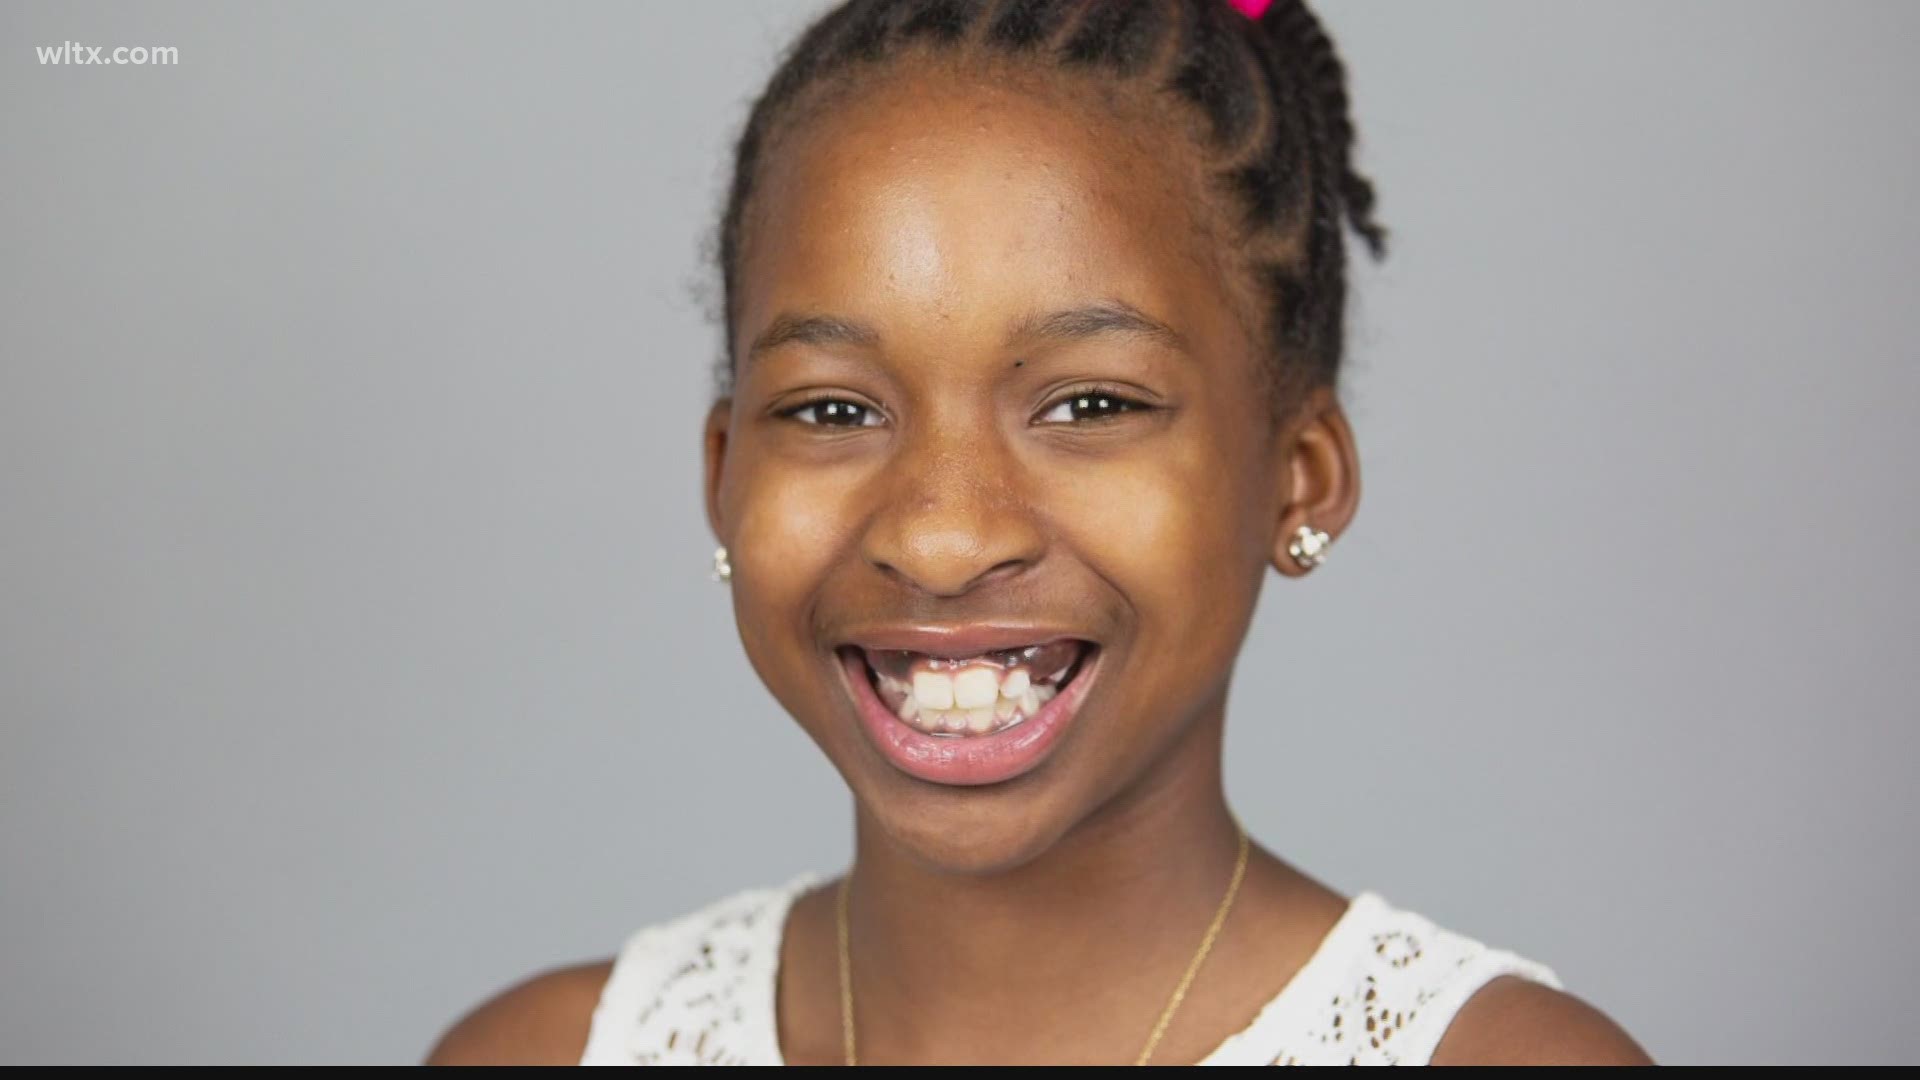 Sydney Jo Washington witnessed bullying first hand and knew she needed to do something about it.